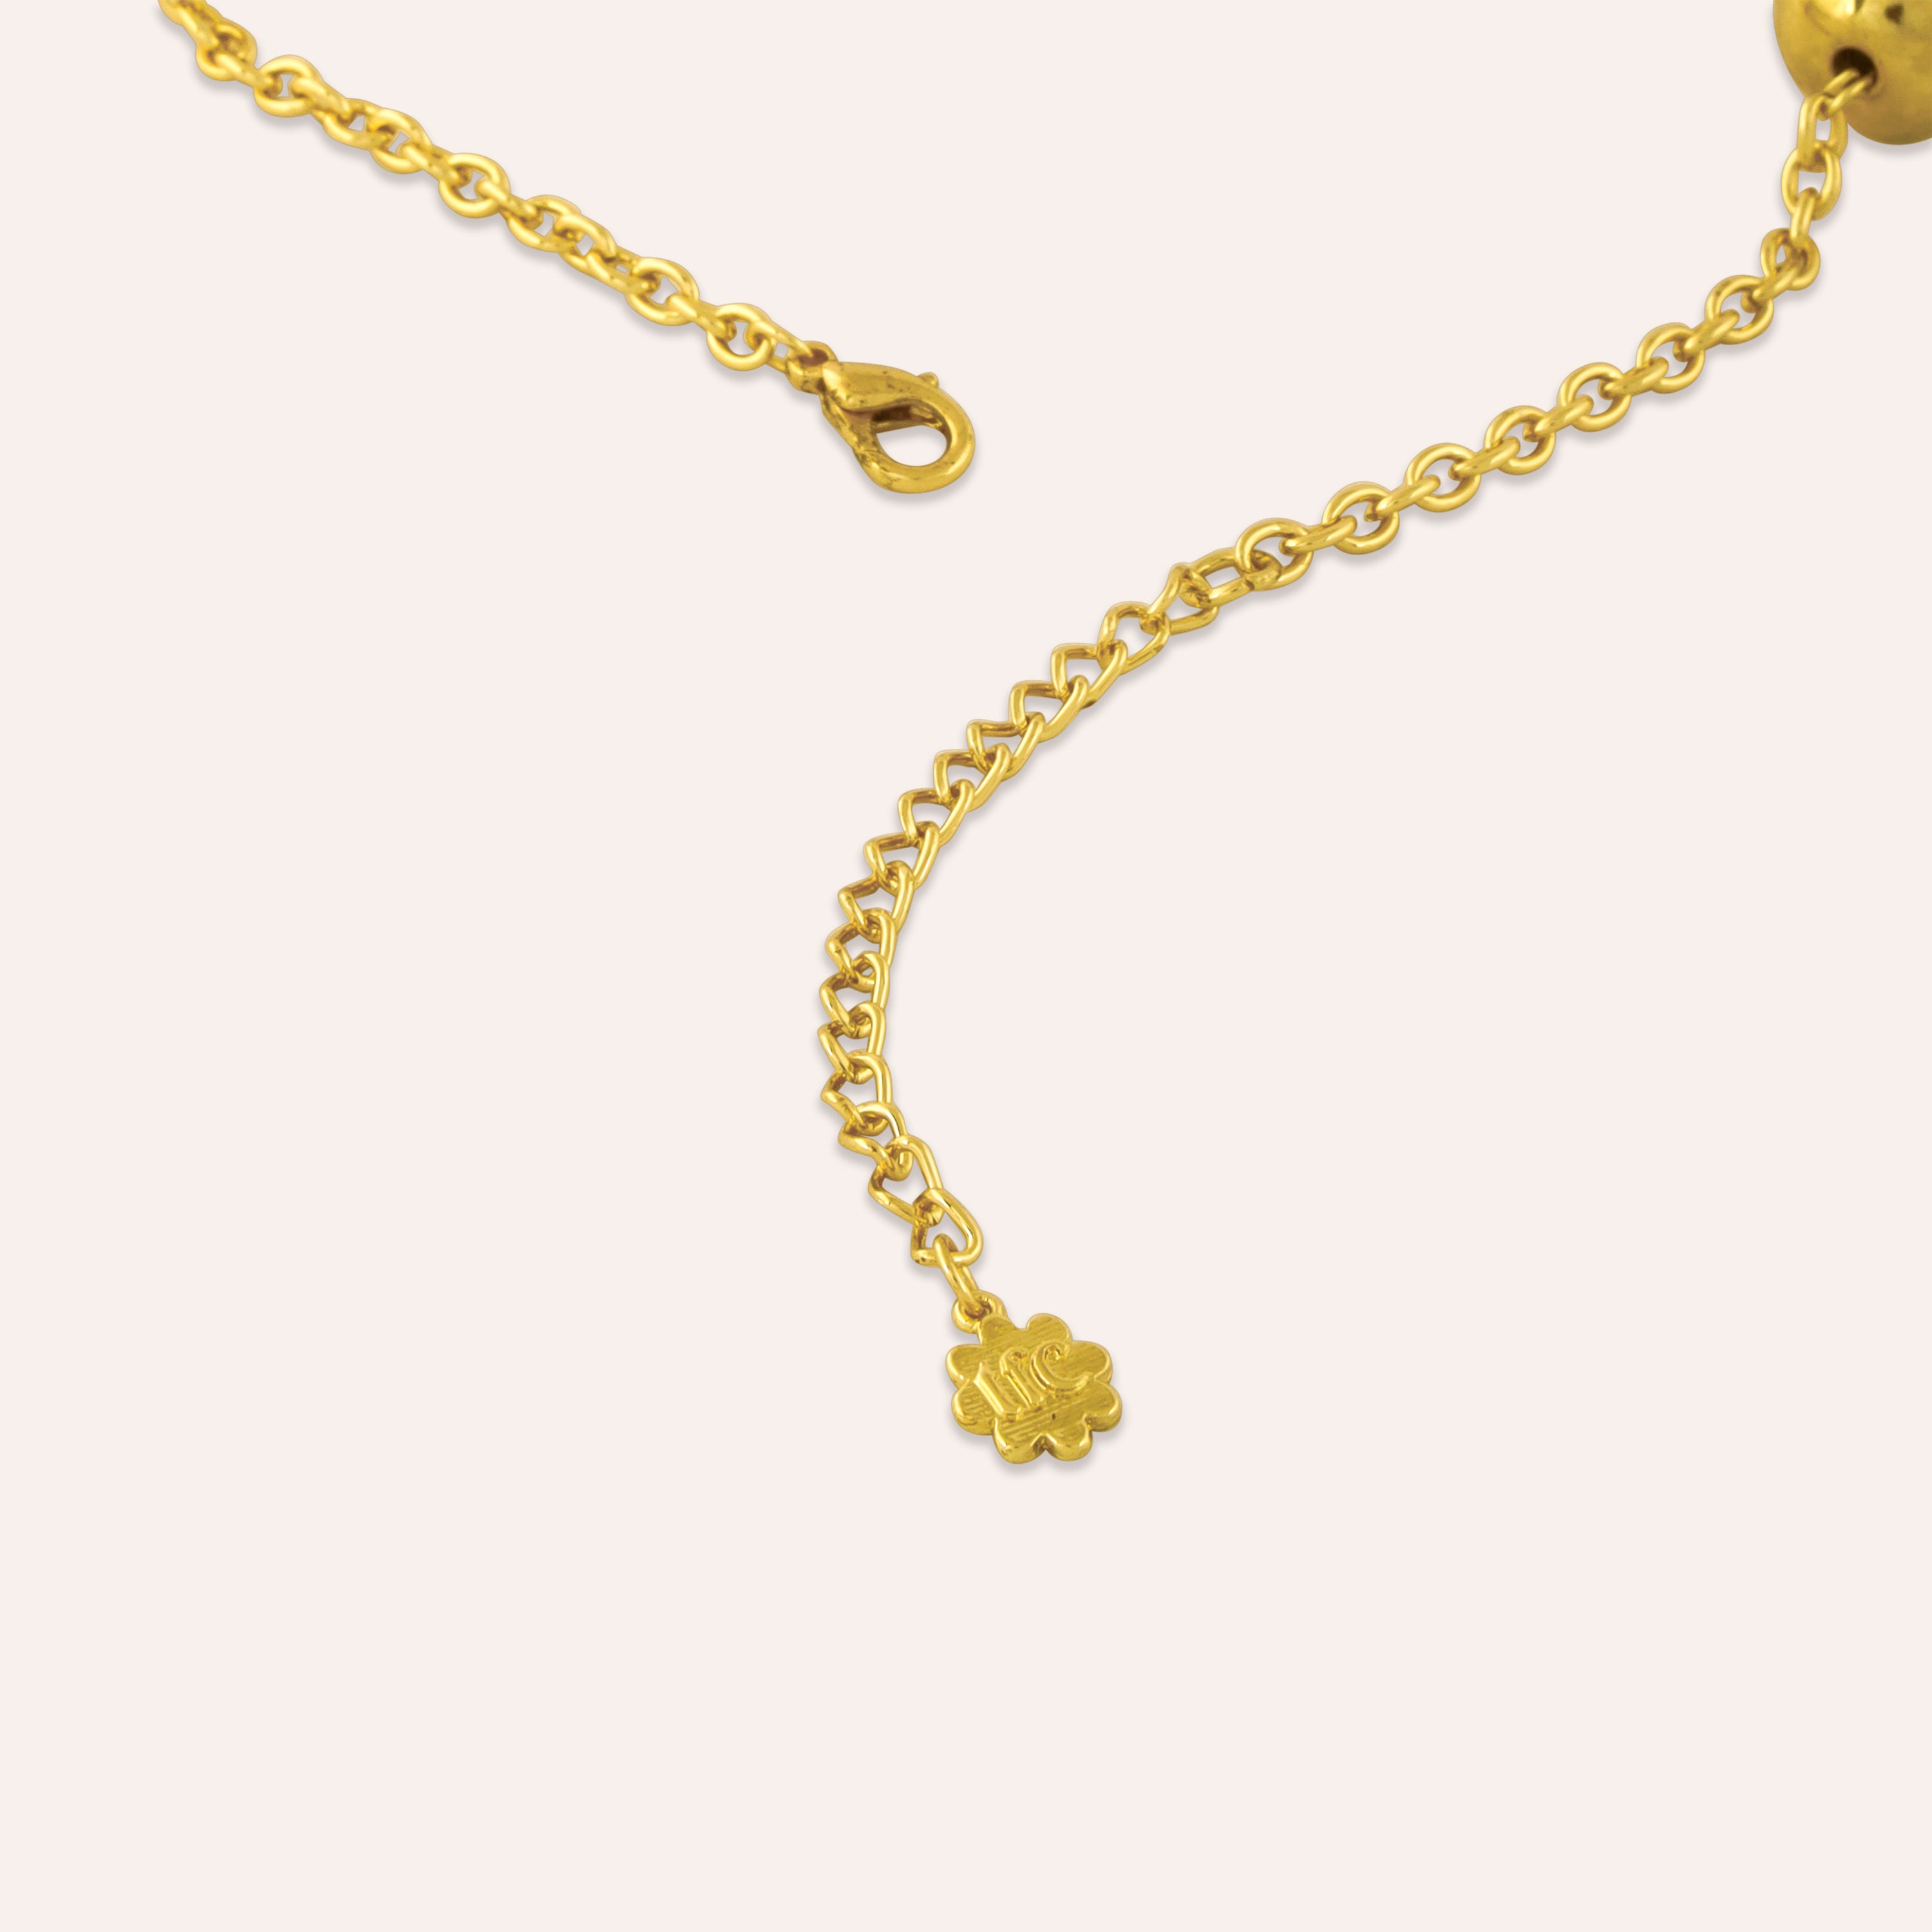 TFC Bold and Gold Pearl Beads Long Gold Plated Necklace